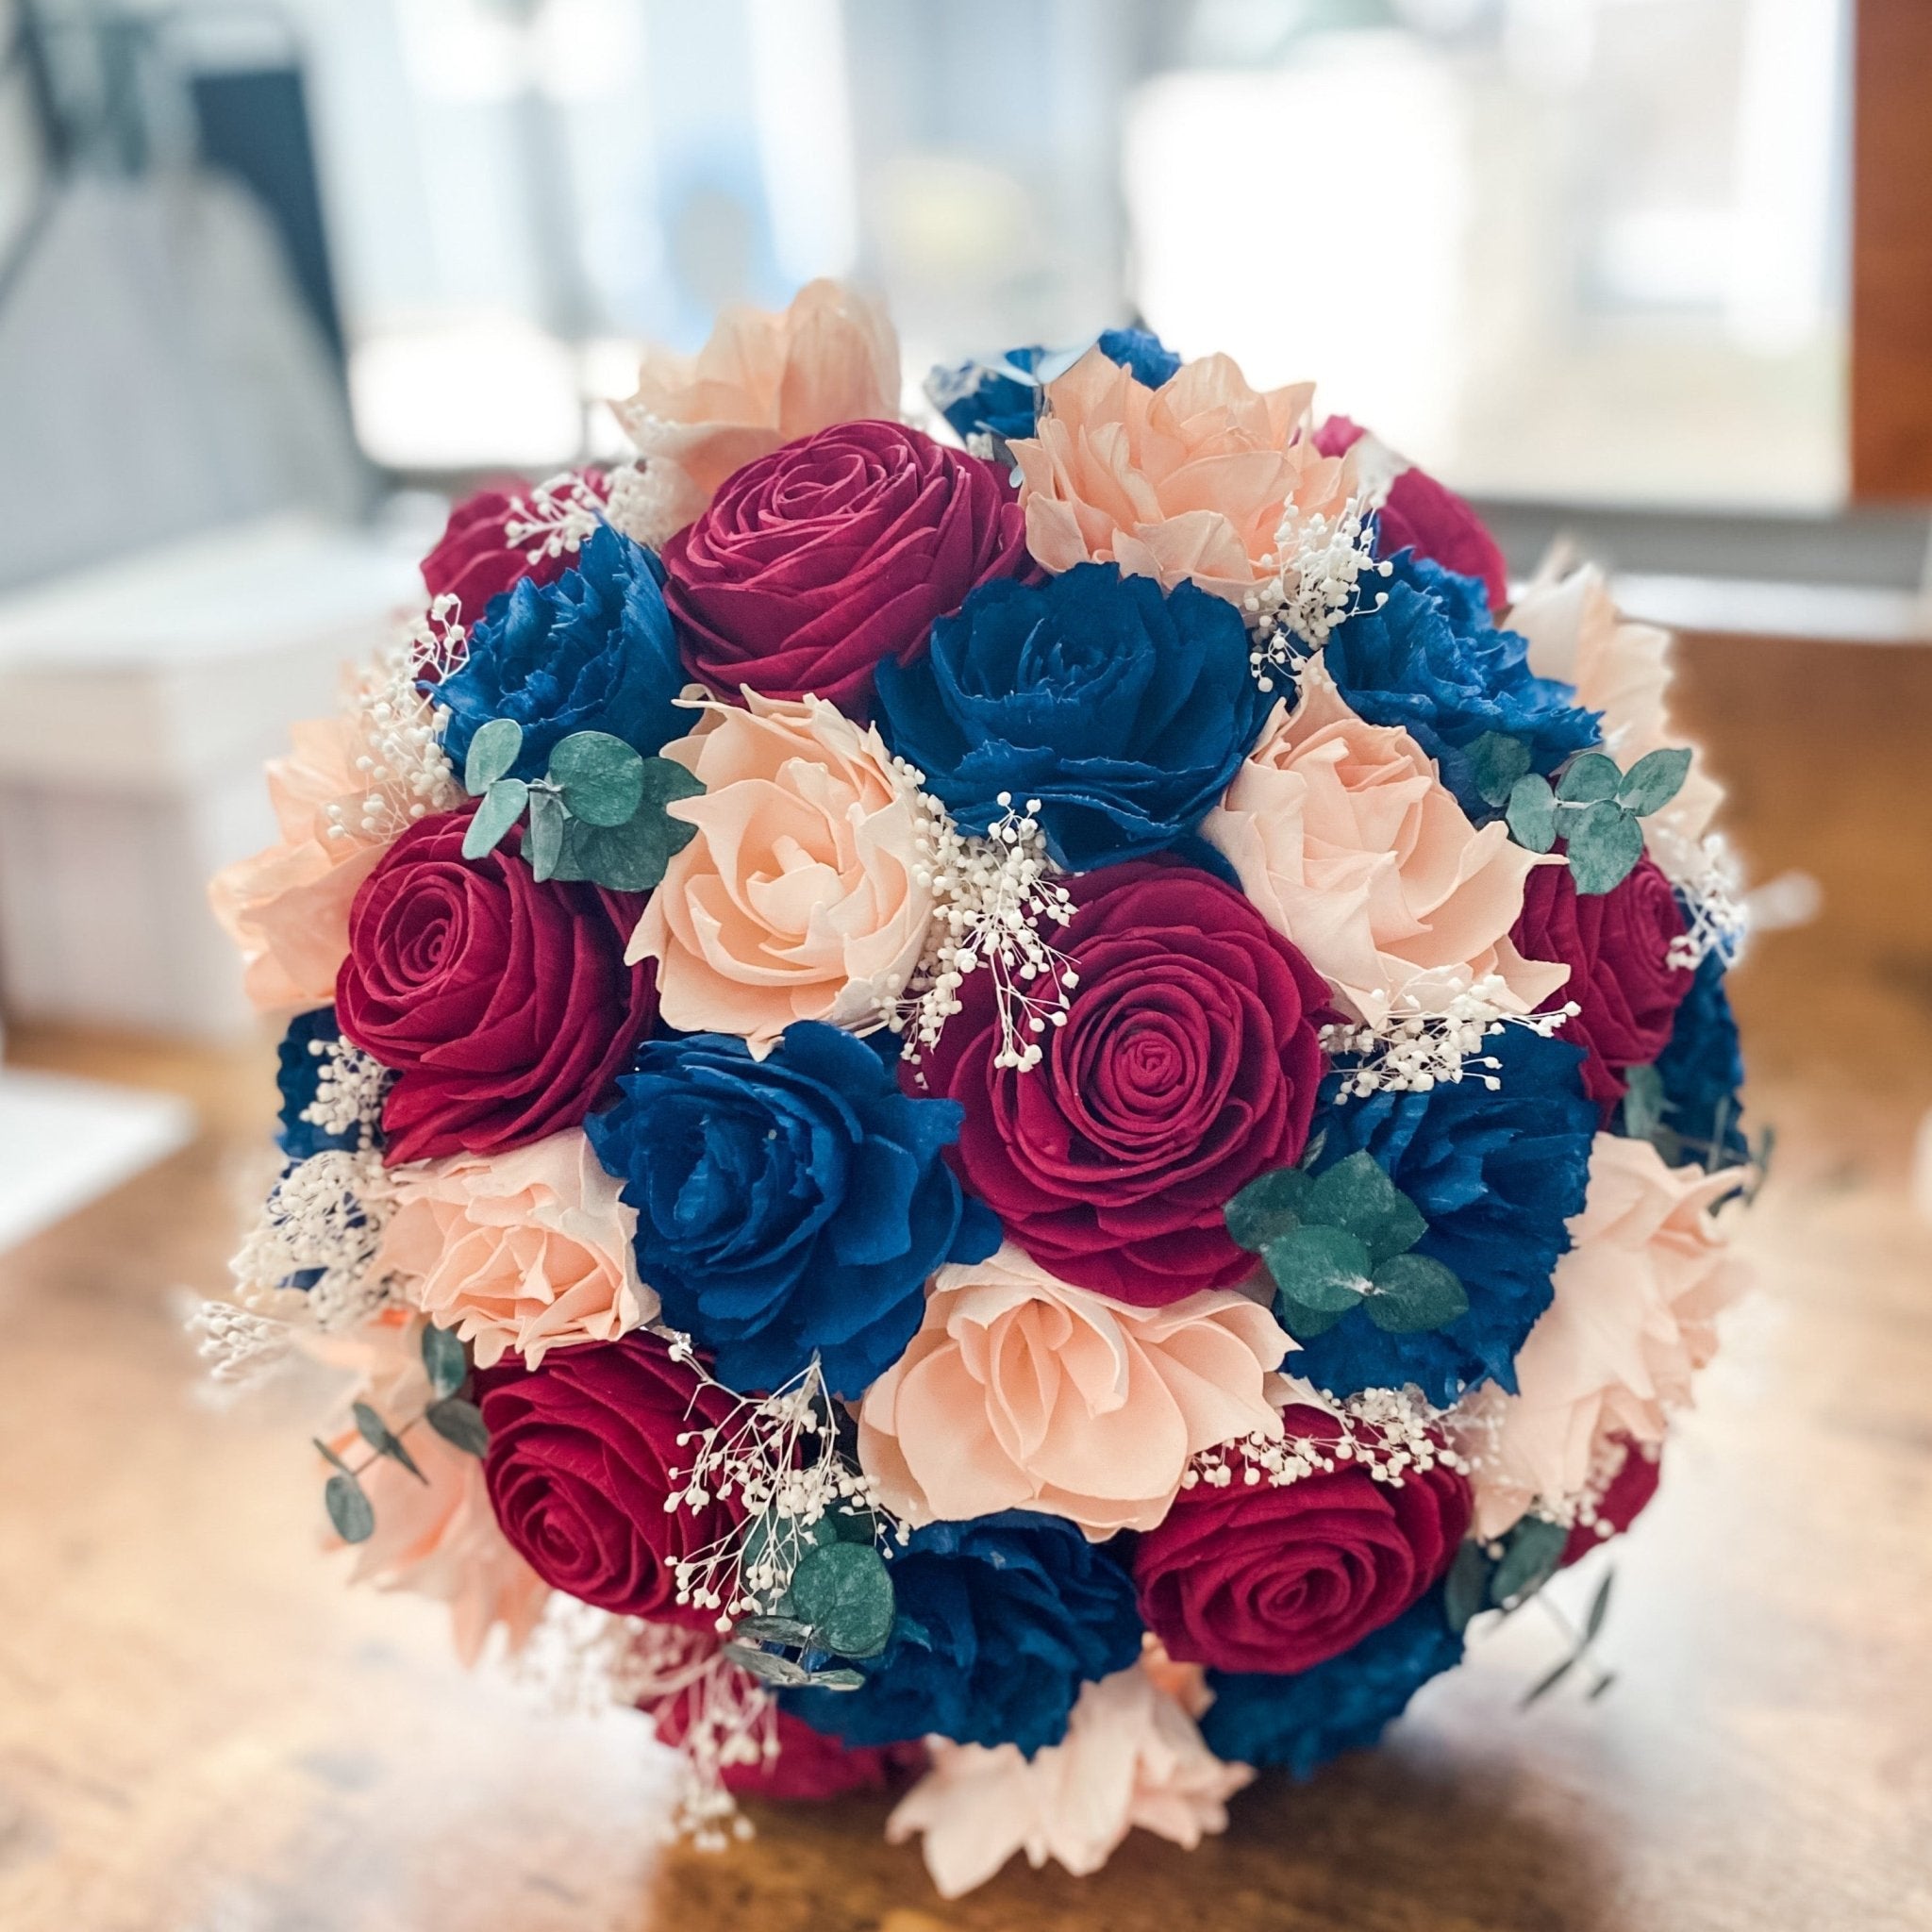 Blissful Union, A Bouquet of Navy Blue and Pink Roses For the Bride's Special Day - PapiroExtra Large 12" Bride